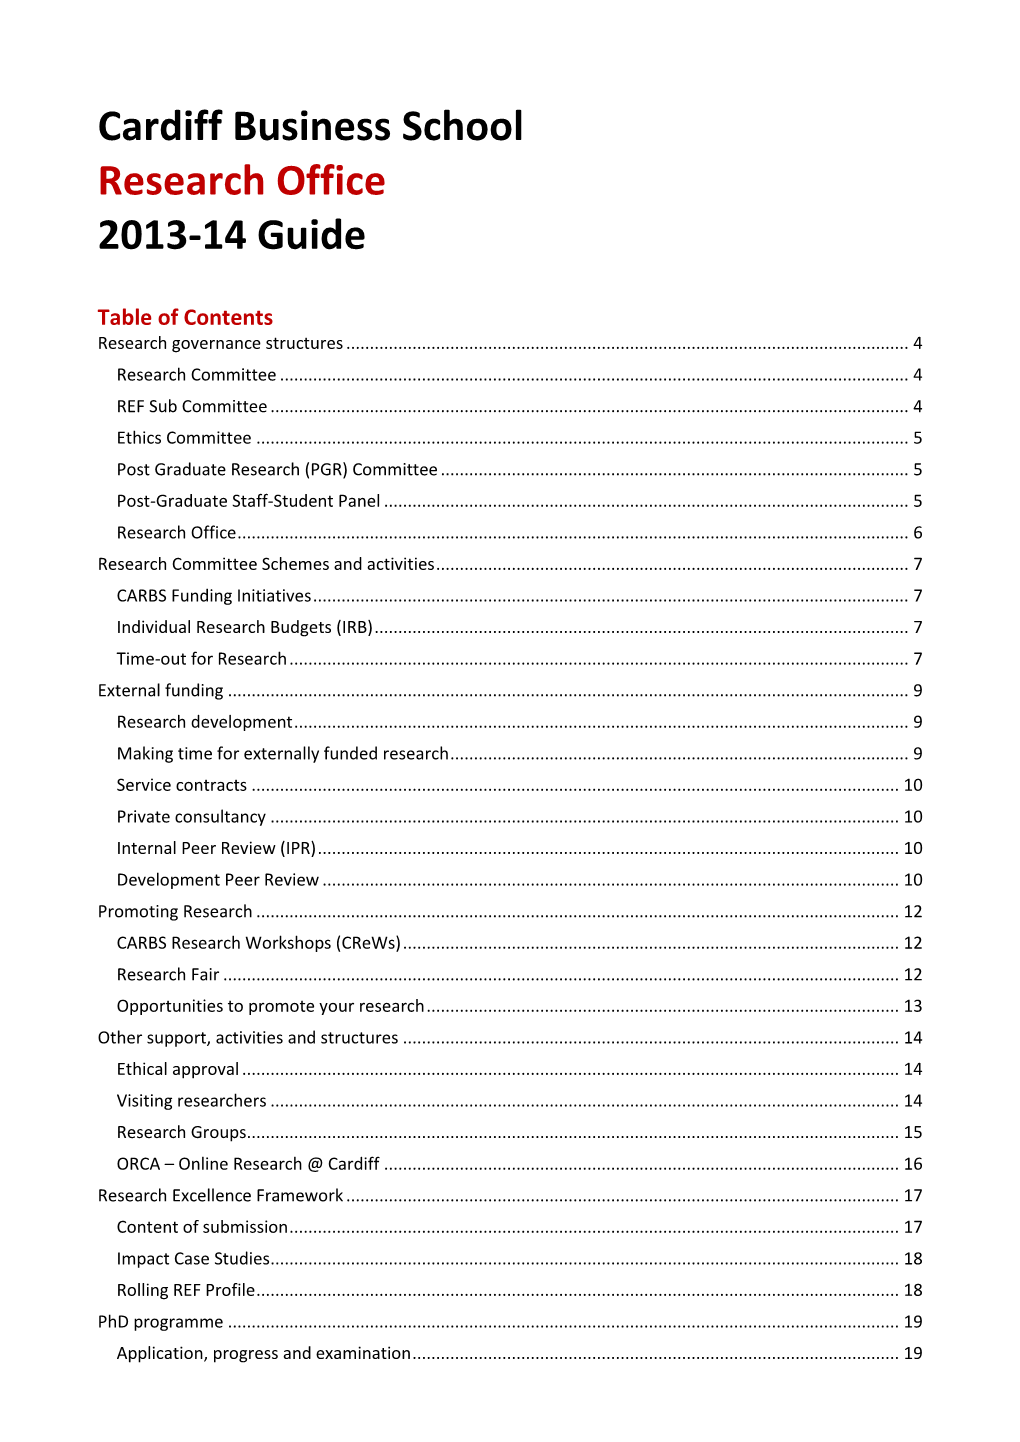 Cardiff Business School Research Office 2013-14 Guide